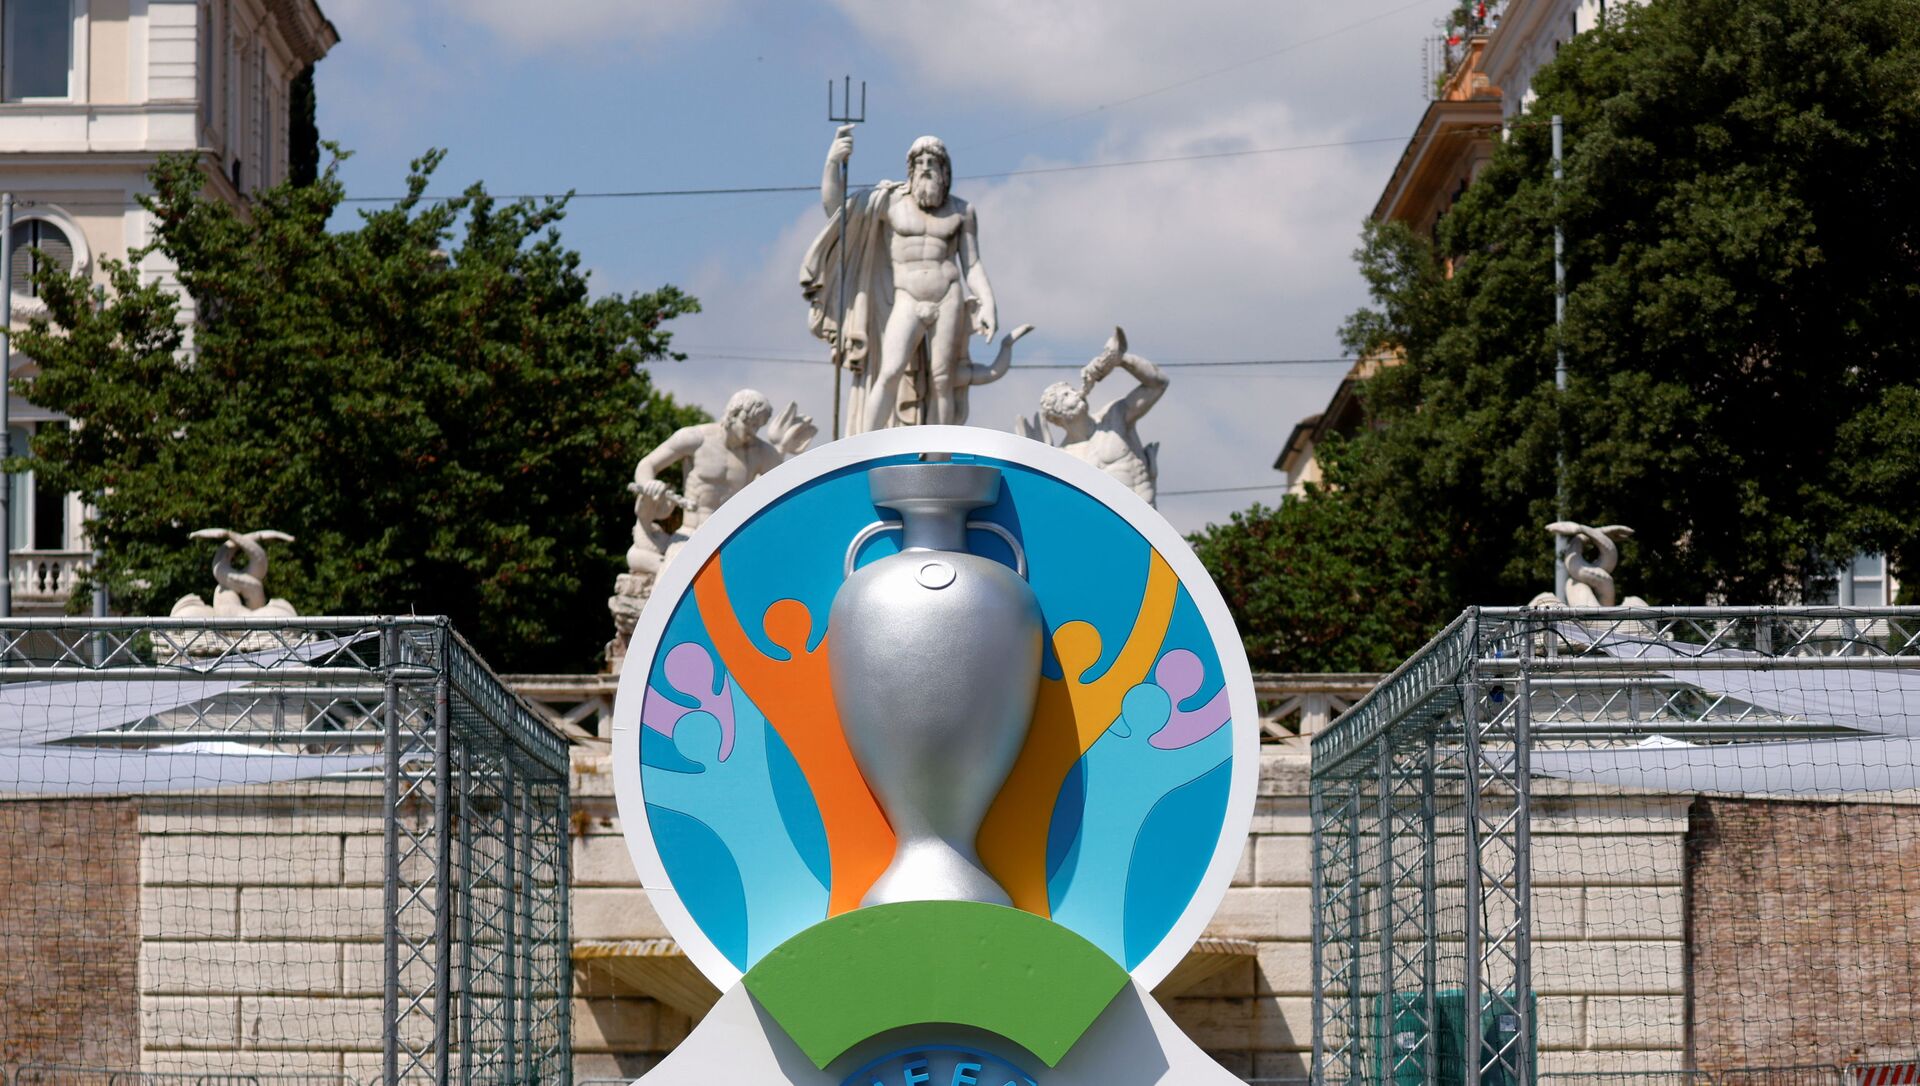 The logo of UEFA Euro 2020 is seen at the fan zone at Piazza del Popolo in Rome, Italy, June 7, 2021 - Sputnik Afrique, 1920, 02.07.2021